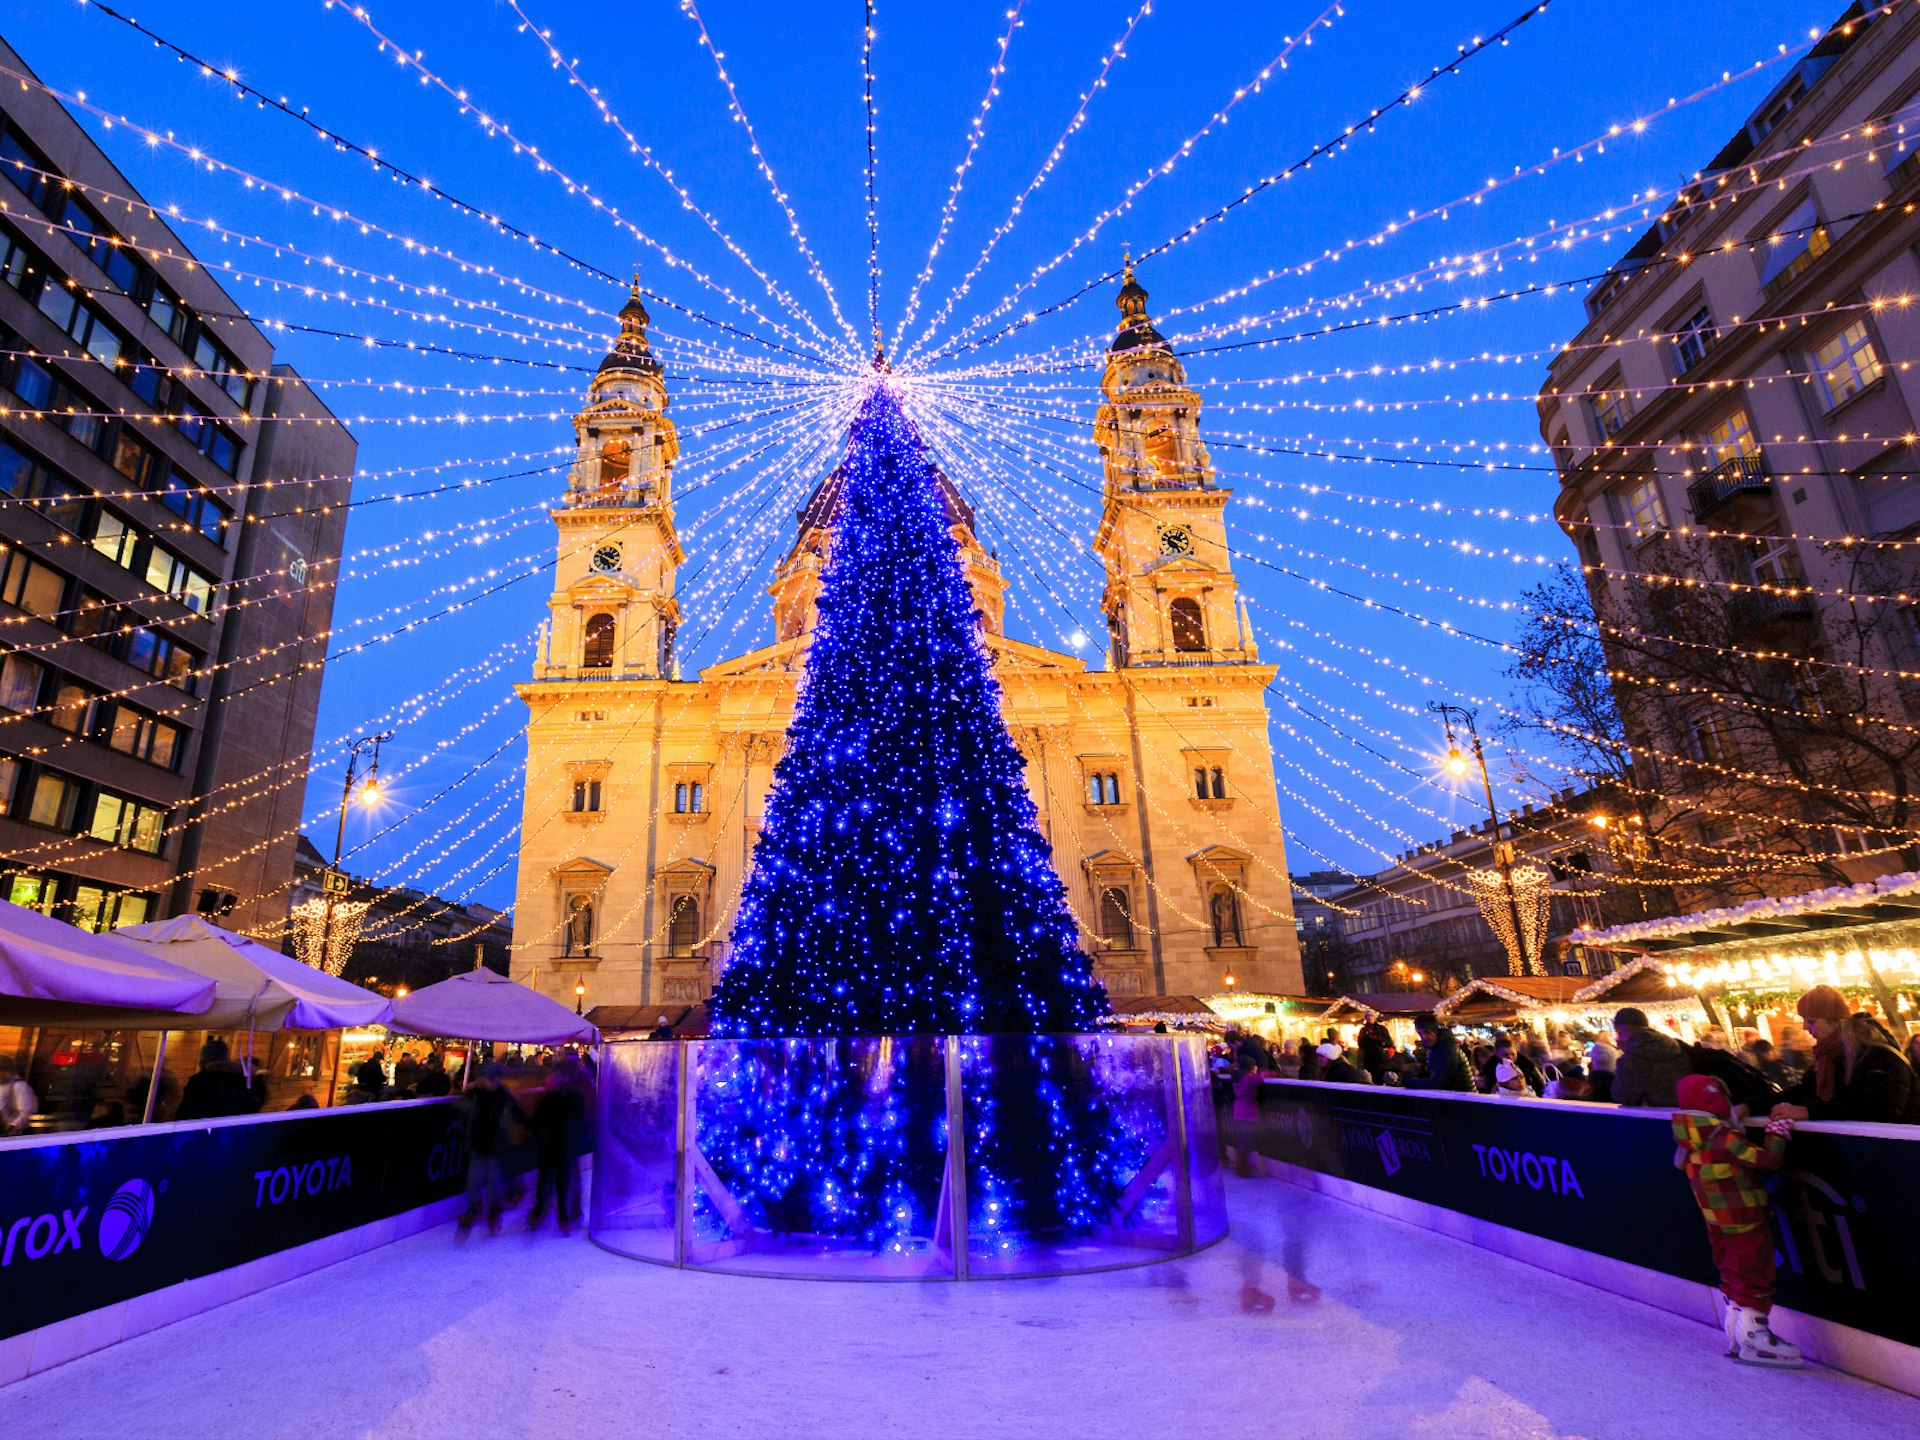 A tall Christmas tree covered in small blue lights stands in the middle of an ice rink in front a large church. Strings of lights fan out from the top of the tree to form a canopy of lights above the ice skaters